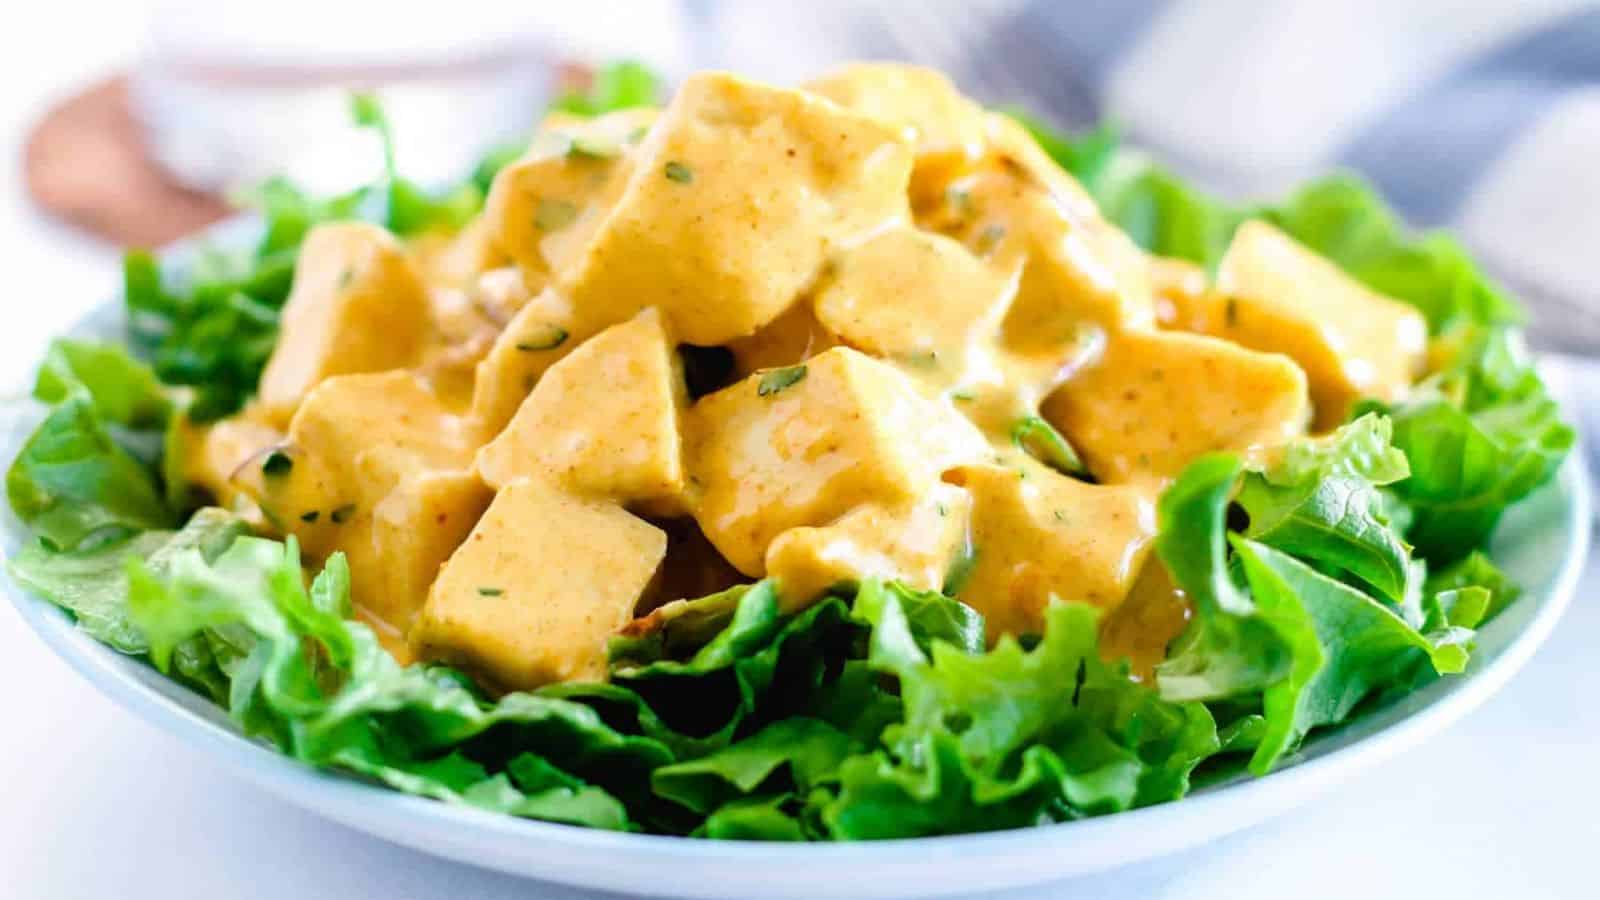 A plate of coronation chicken salad.